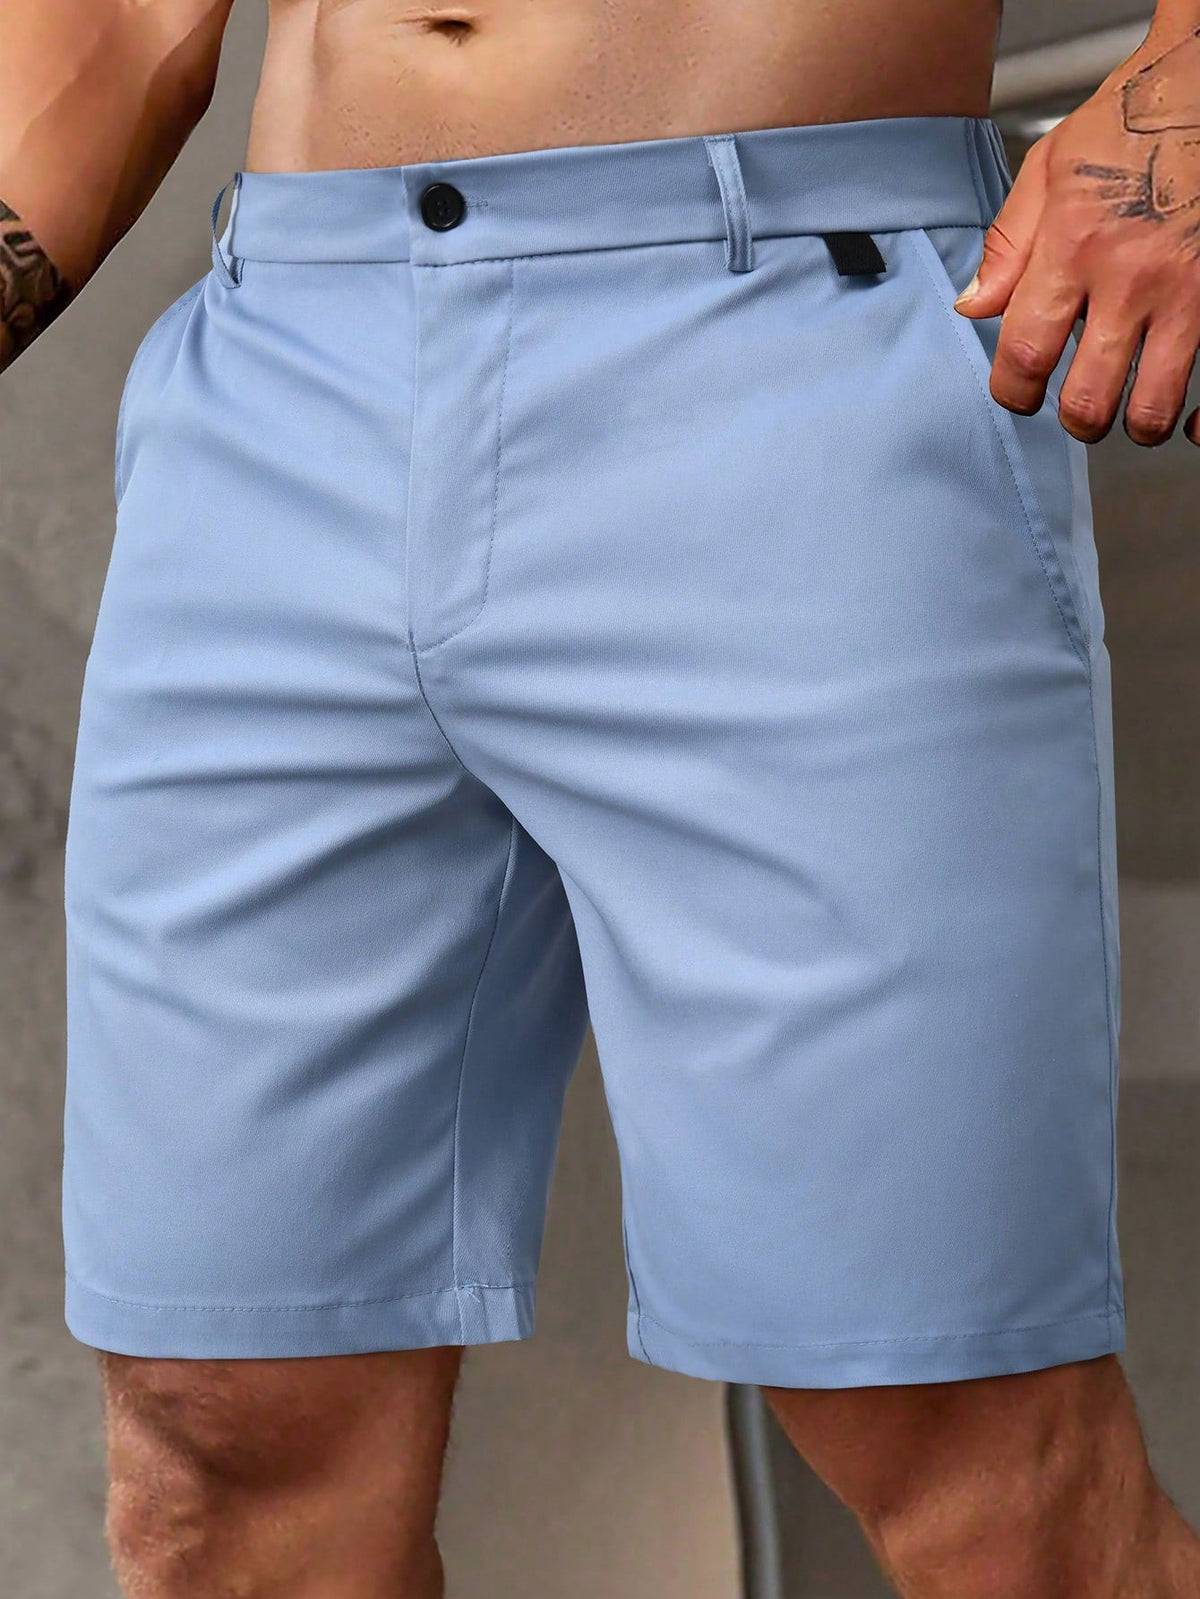 Men's Casual Bermuda Shorts with Pockets - Solid Color, Zipper Fly, Regular Fit